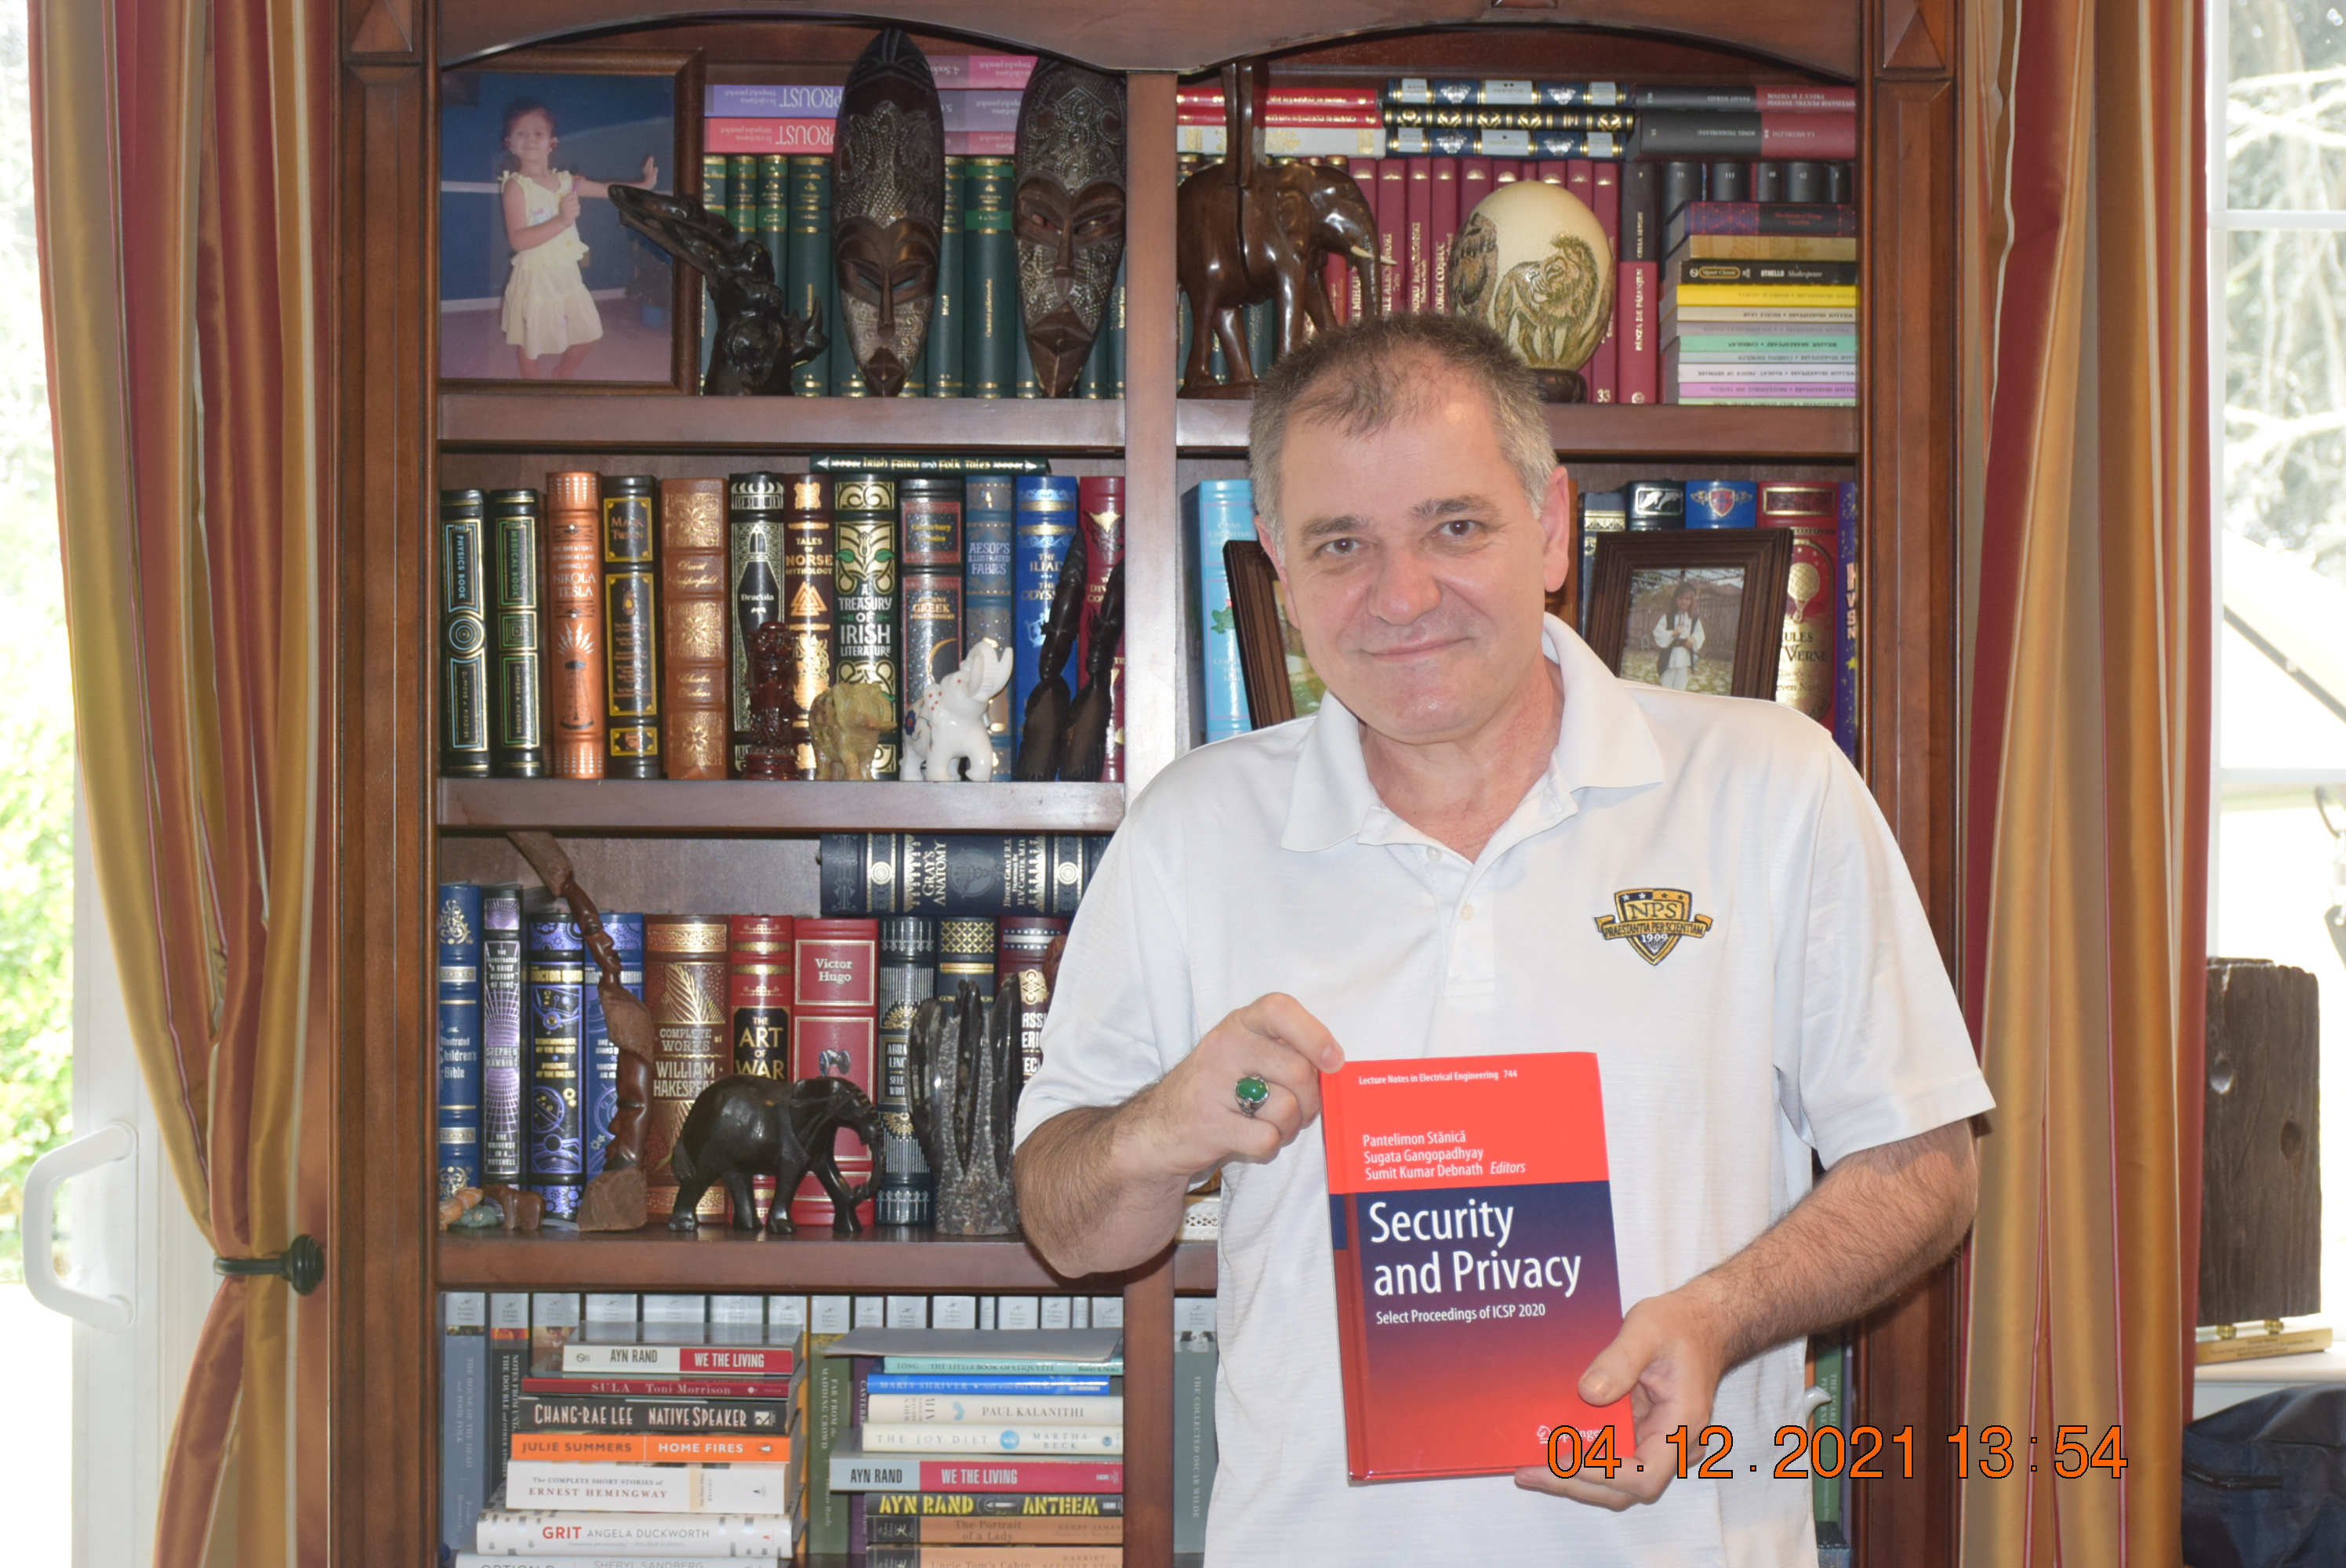 Professor Pante Stanica new book, Security and Privacy 